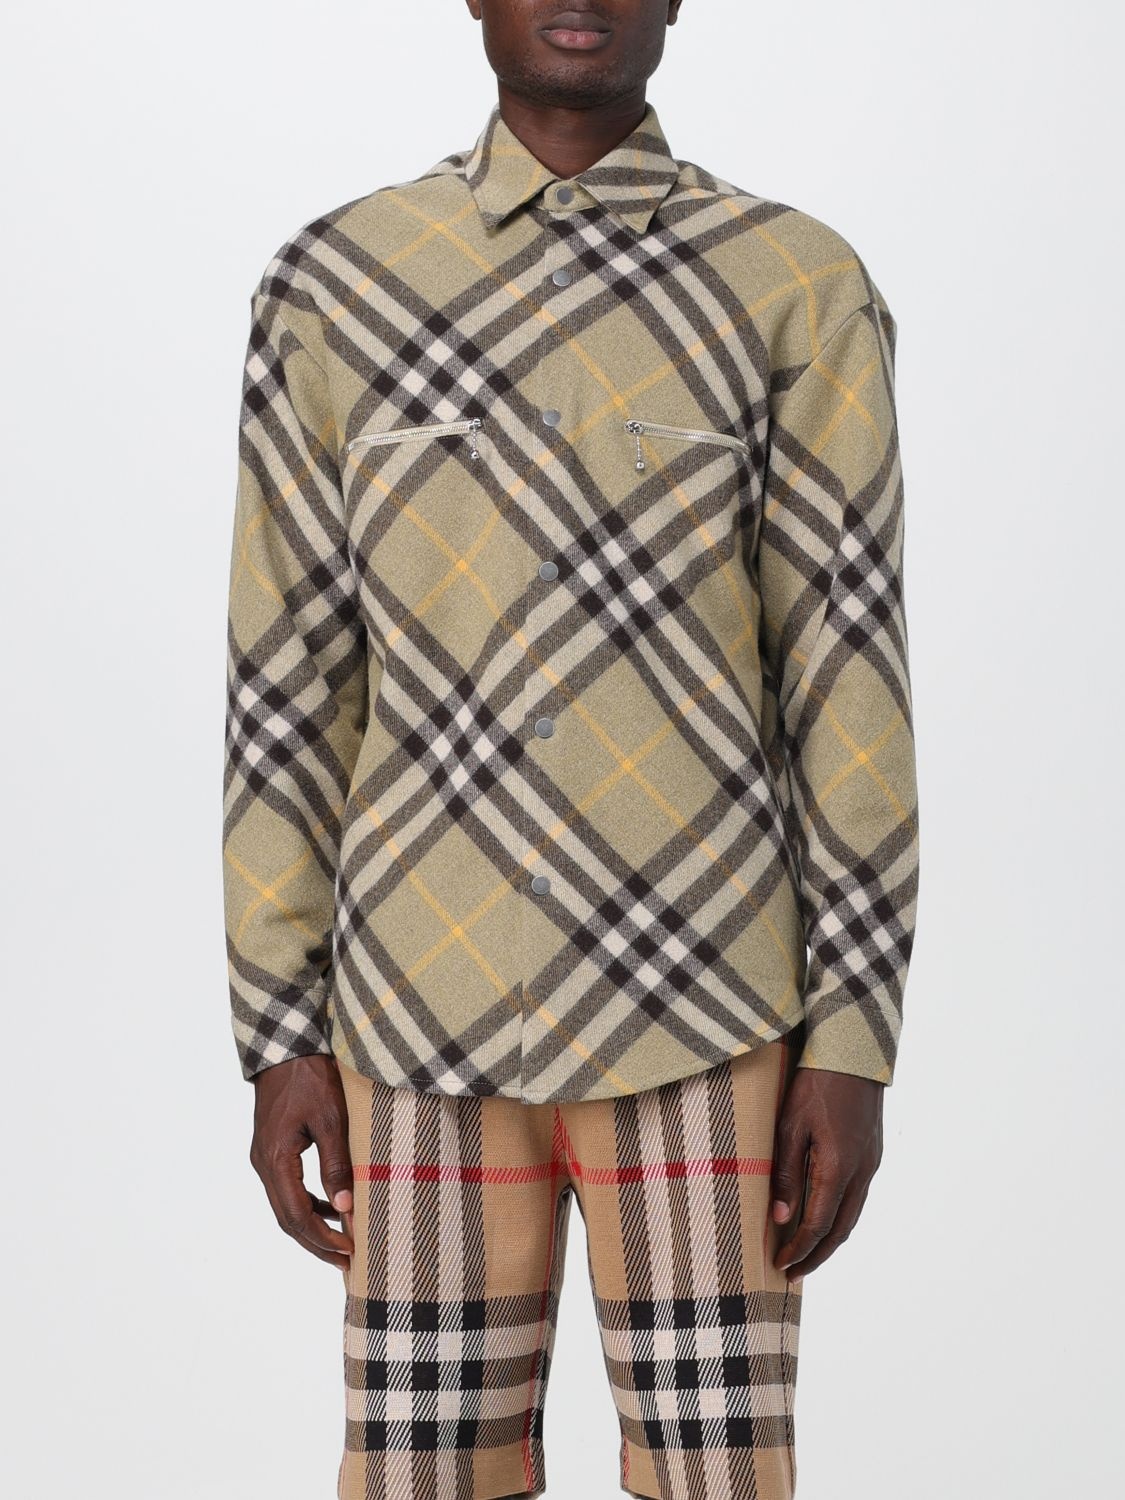 Burberry shirt in check pattern wool blend - 1